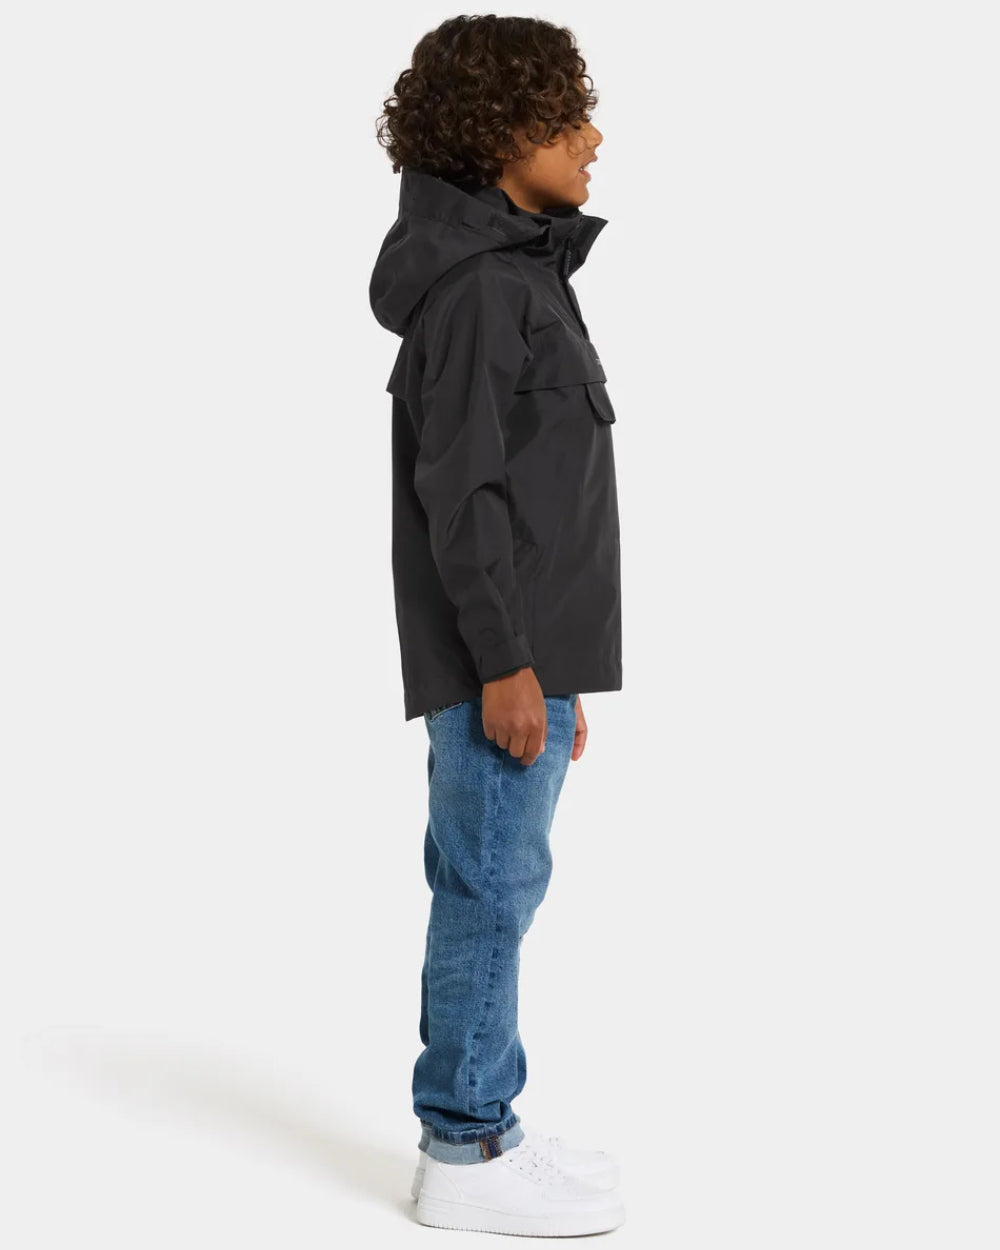 Black Coloured Didriksons Pi Childrens Anorak On A Grey Background 